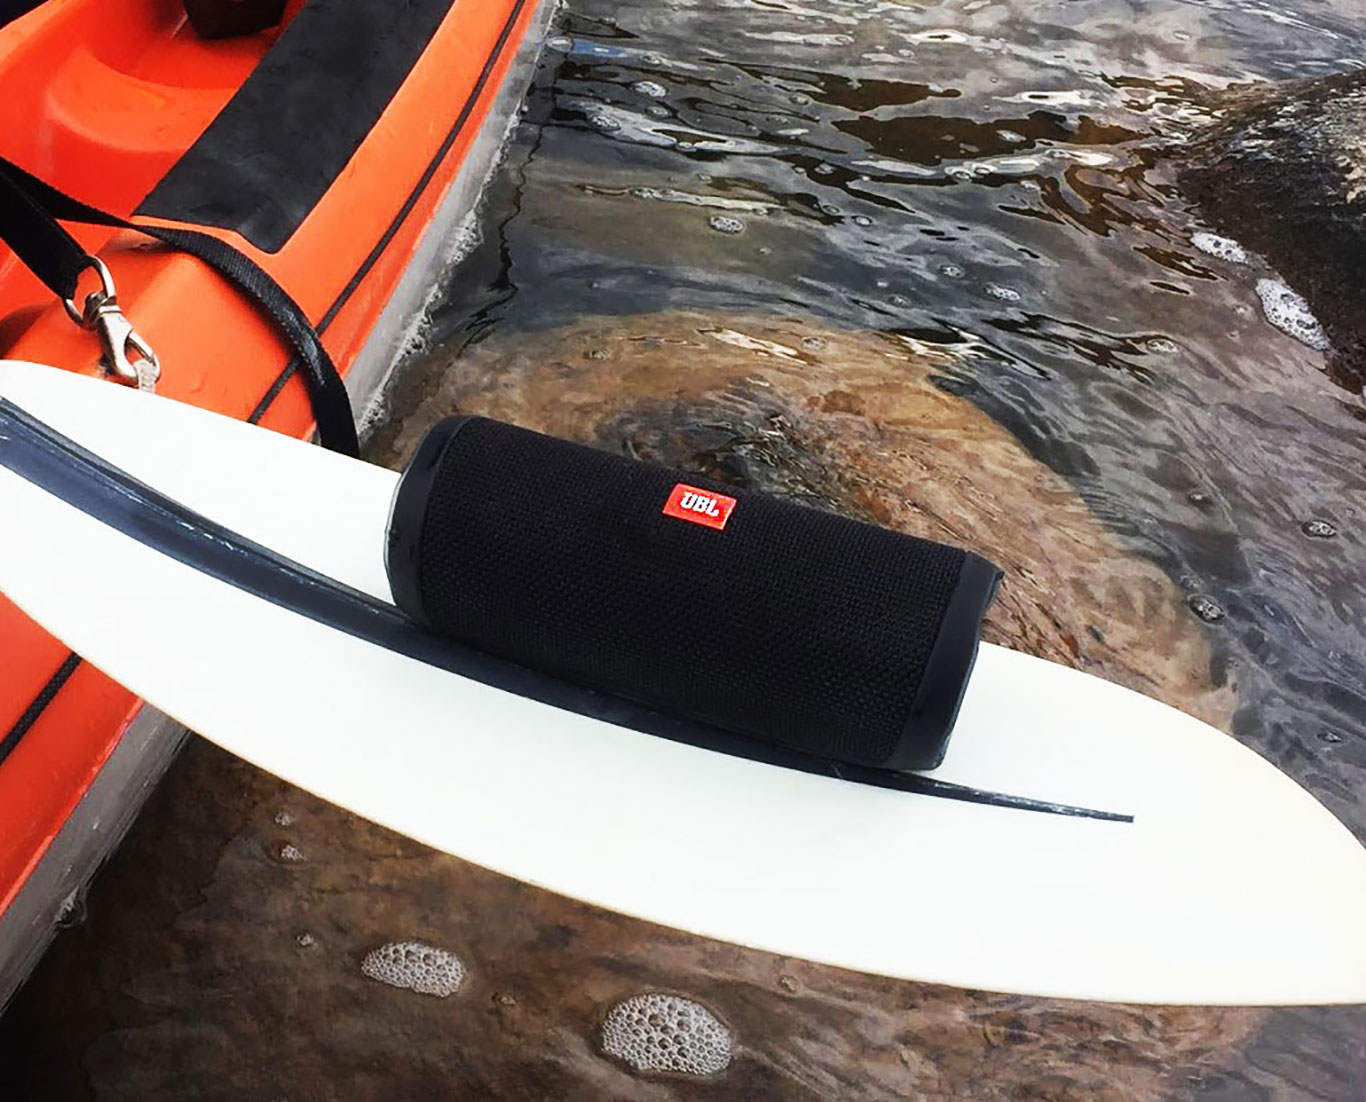 Fishing and Music? A Review of the Waterproof JBL Flip 4 Speaker and Fishing